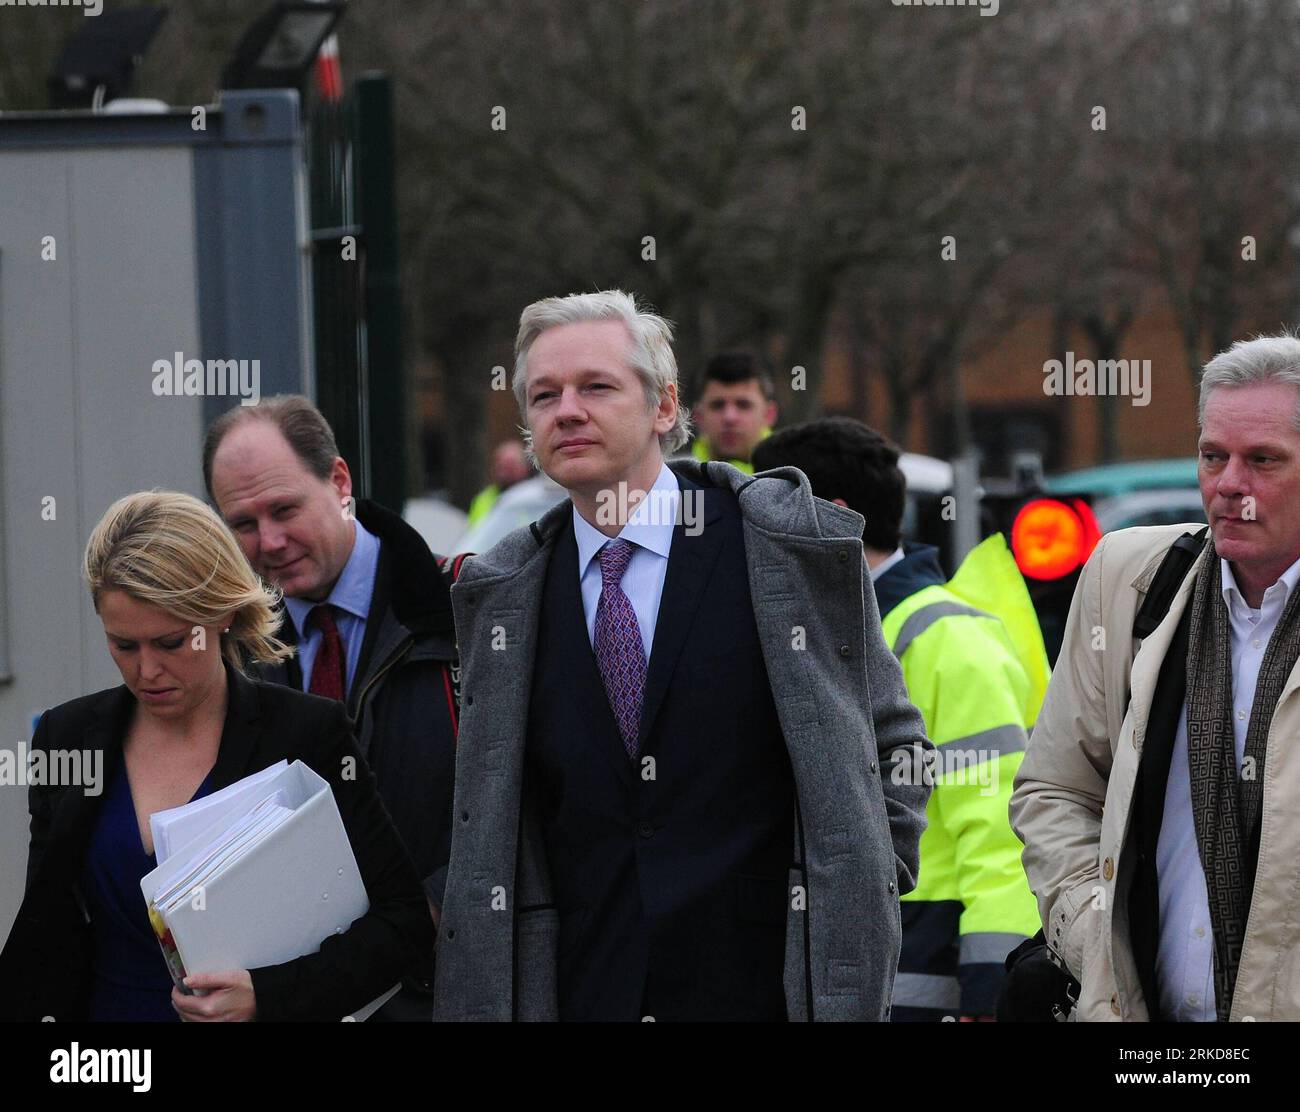 Bildnummer: 54885764  Datum: 07.02.2011  Copyright: imago/Xinhua (110207) -- LONDON, Feb. 7, 2011 (Xinhua) -- Wikileaks founder Julian Assange (C) arrives at Belmarsh Magistrates Court in London to attend a two-day final hearing examining his extradition to Sweden, Feb. 7, 2011. (Xinhua/Zeng Yi) (djj) BRITAIN-WIKILEAKS-ASSANGE-HEARING PUBLICATIONxNOTxINxCHN People Politik kbdig xdp 2011 quer Highlight premiumd     Bildnummer 54885764 Date 07 02 2011 Copyright Imago XINHUA  London Feb 7 2011 XINHUA wikileaks Founder Julian Assange C arrives AT Belmarsh Magistrates Court in London to attend a Tw Stock Photo